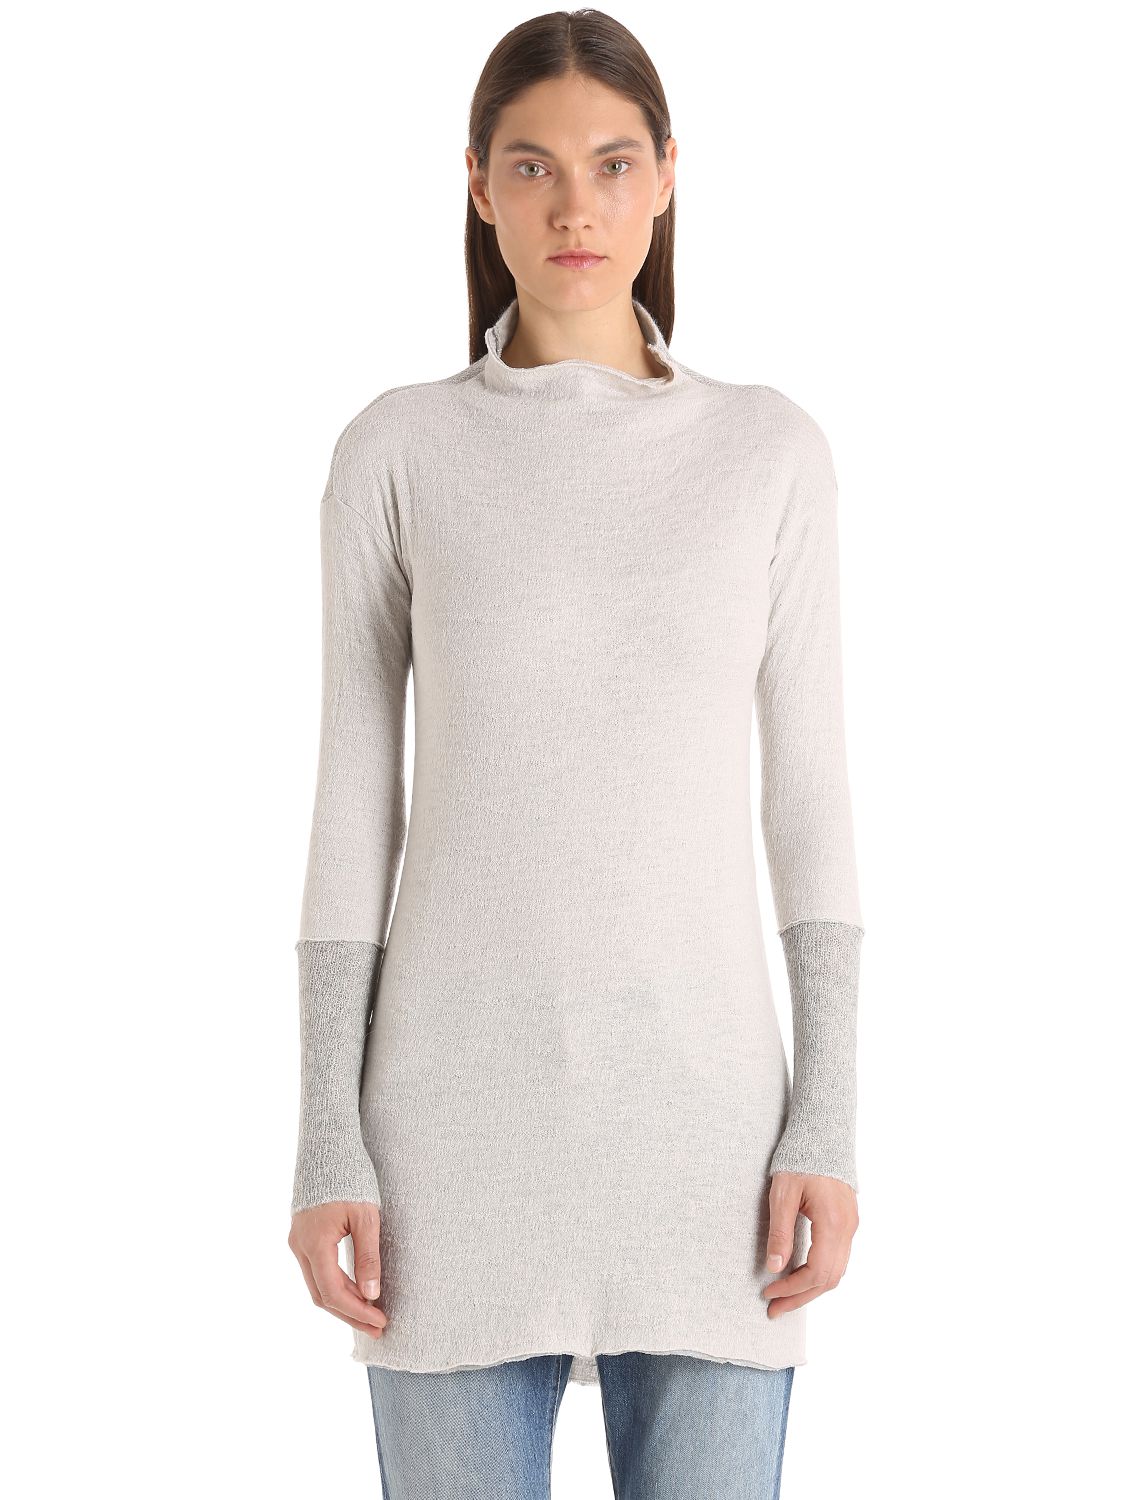 Transit Par-such Wool Blend Knit Sweater In White/grey